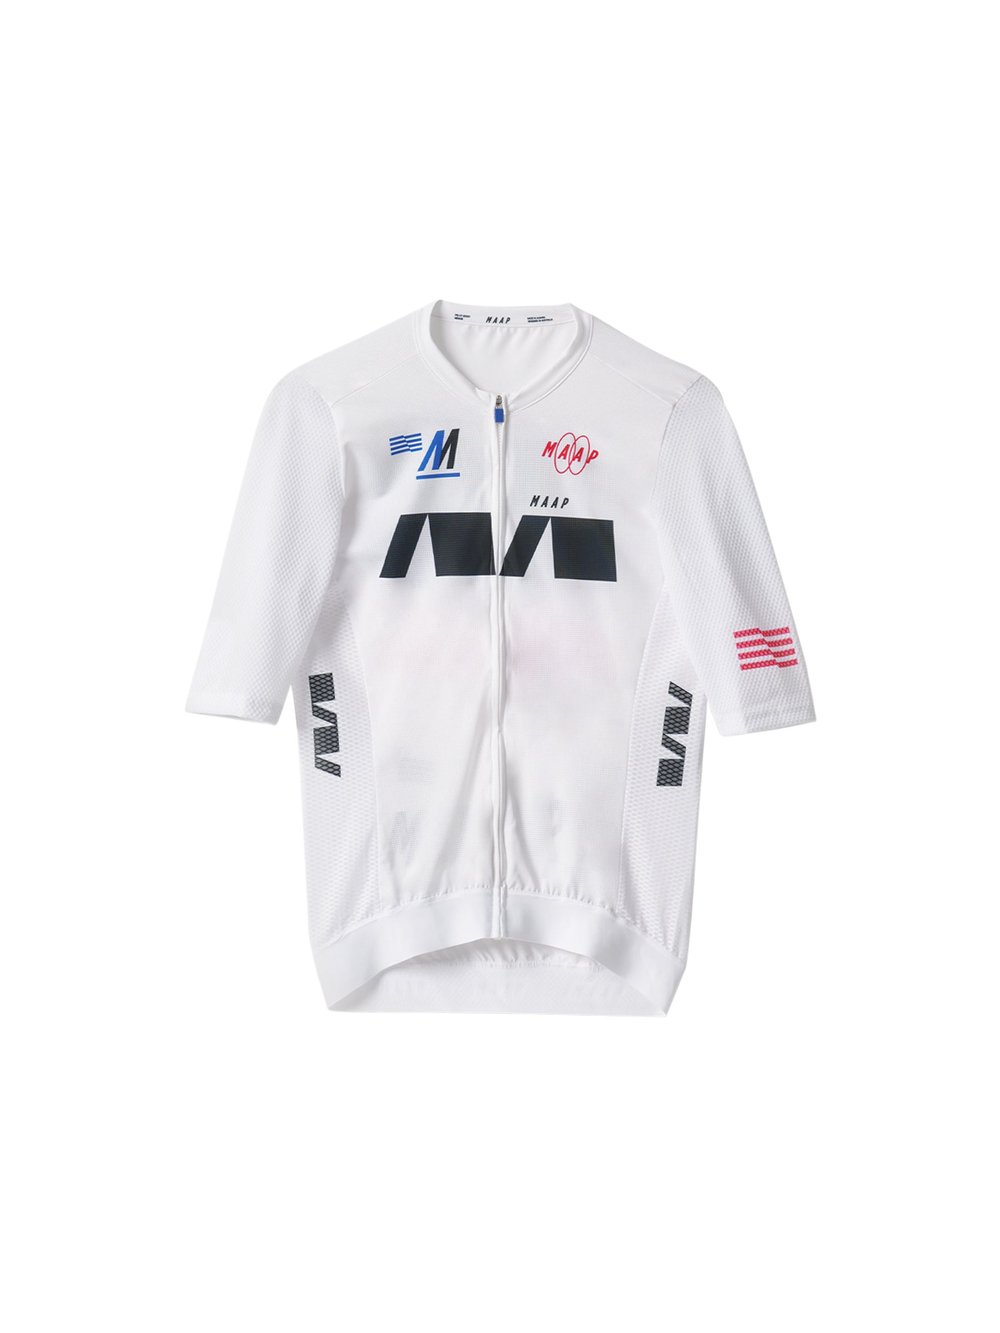 Product Image for Trace Pro Air Jersey